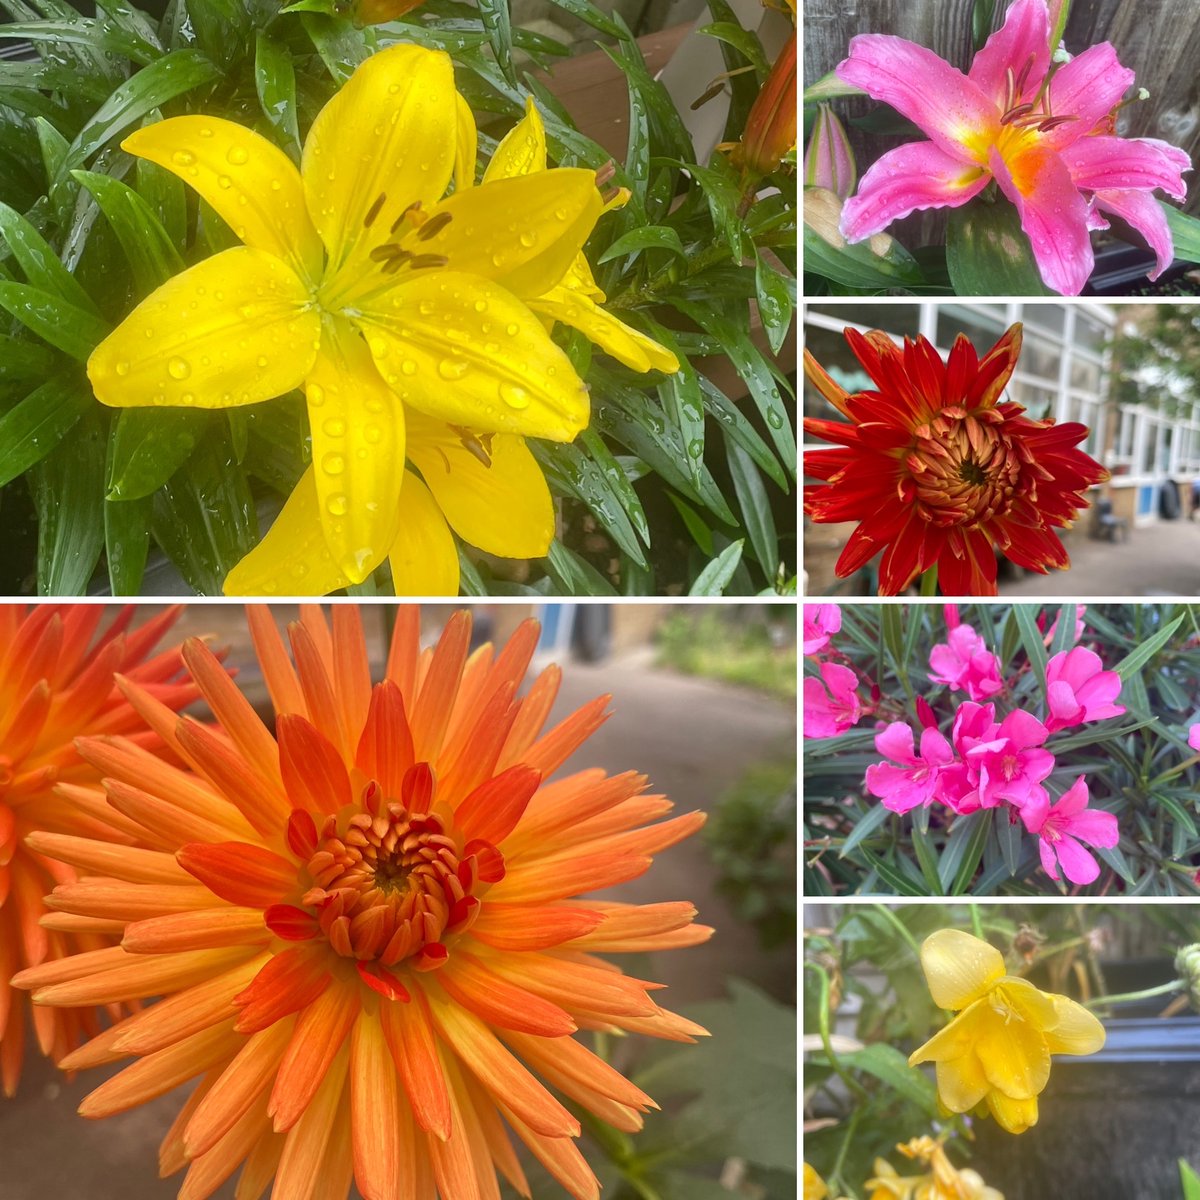 #GardeningTwitter This is first time posting with this hashtag. 😊Here is a selection of the flowers the children from my little gardening club have helped grow! #SixOnSaturday
#Gardening #Flowers #GardeningTwitter
#DollysCottageGarden